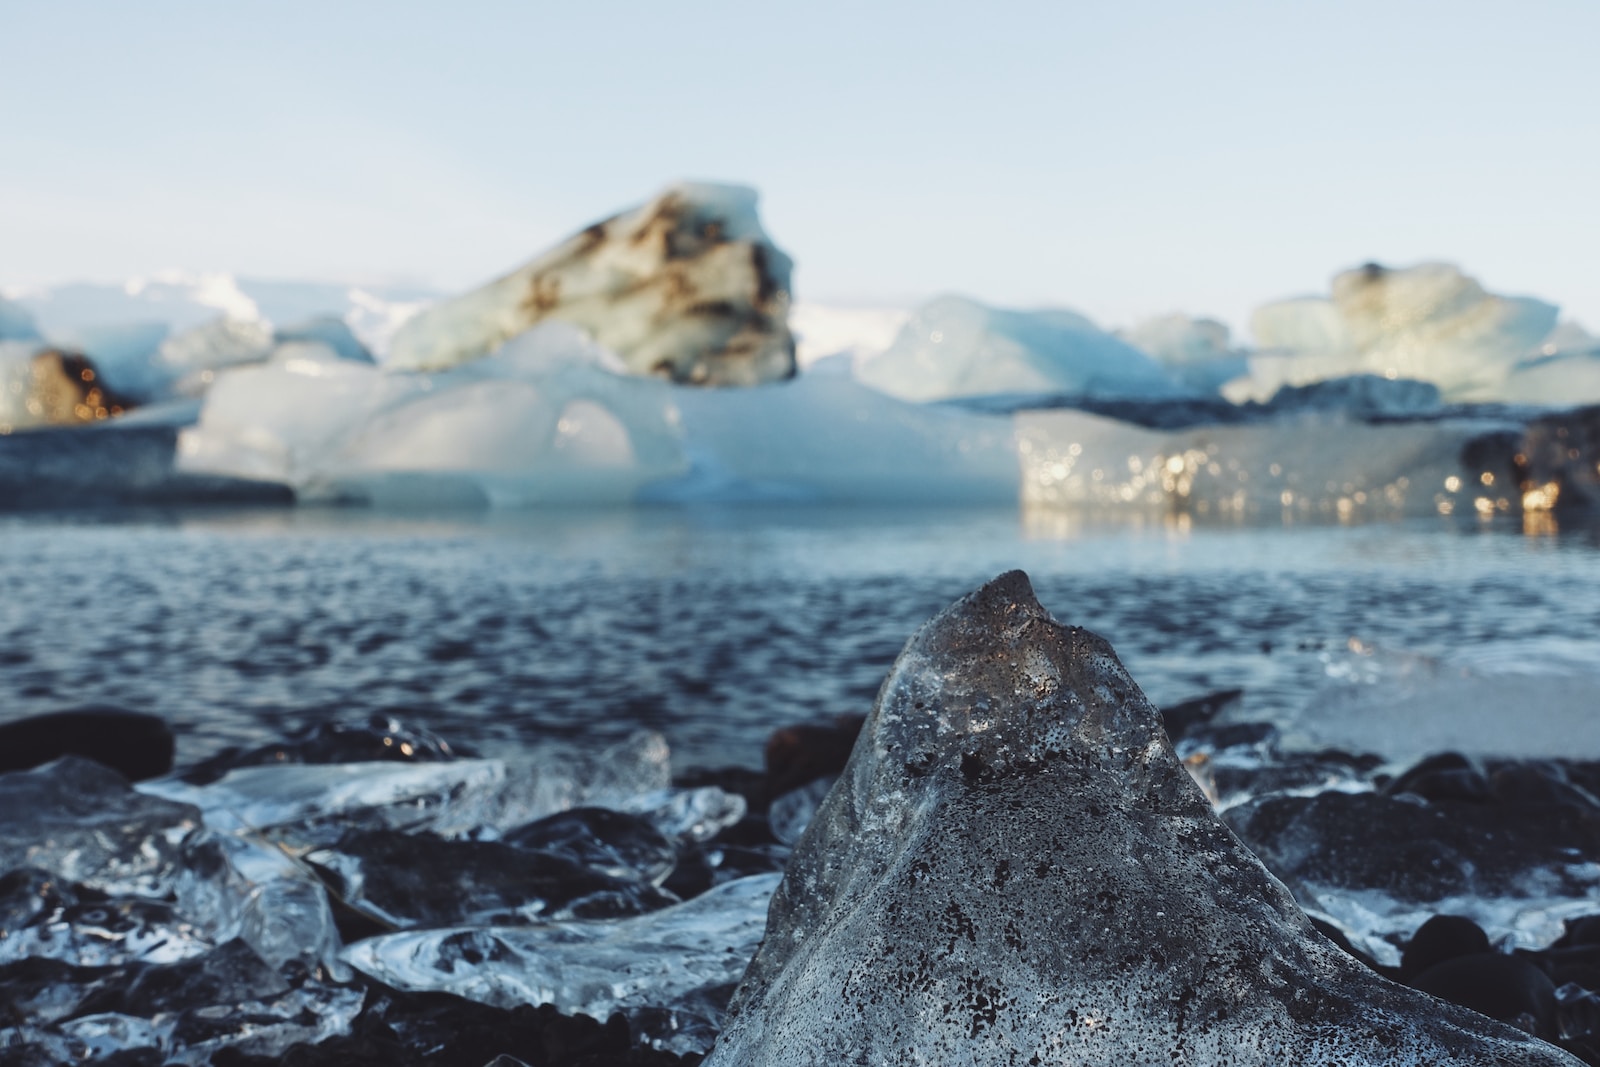 landscape photography of body of water and ice blokcs